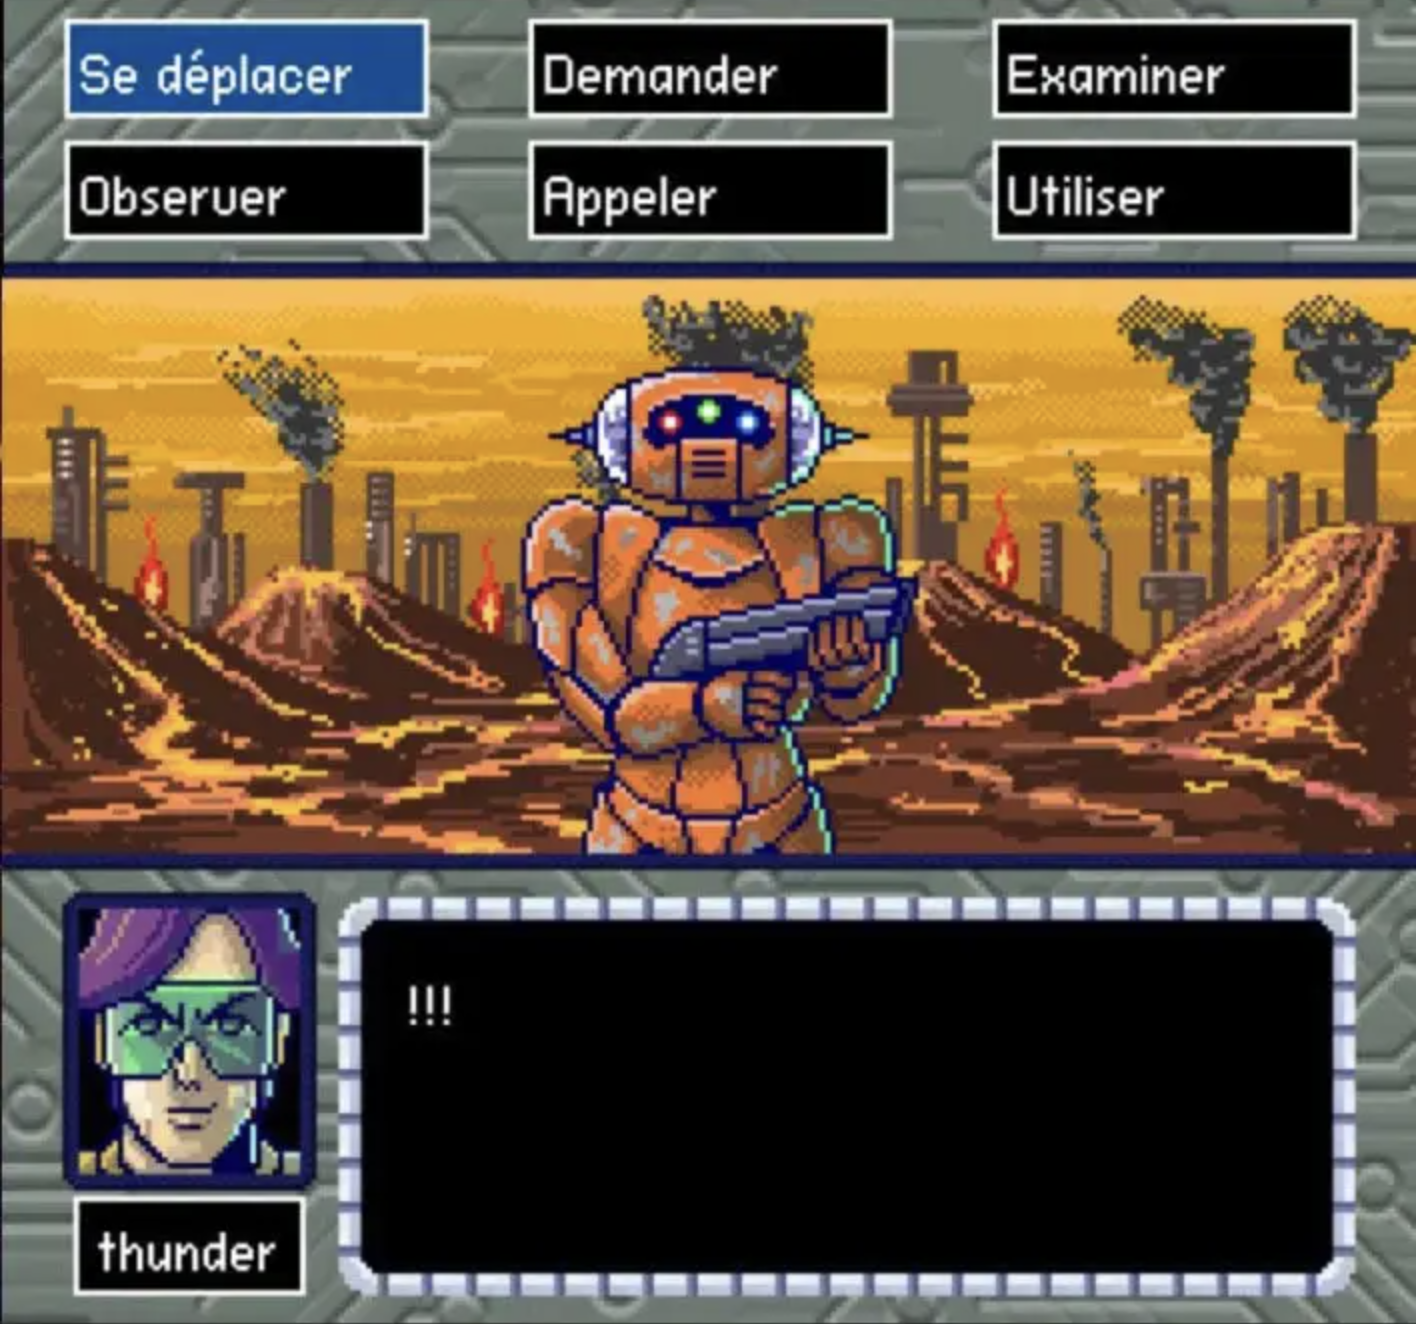 A screenshot from the Omega 6 spin-off video game